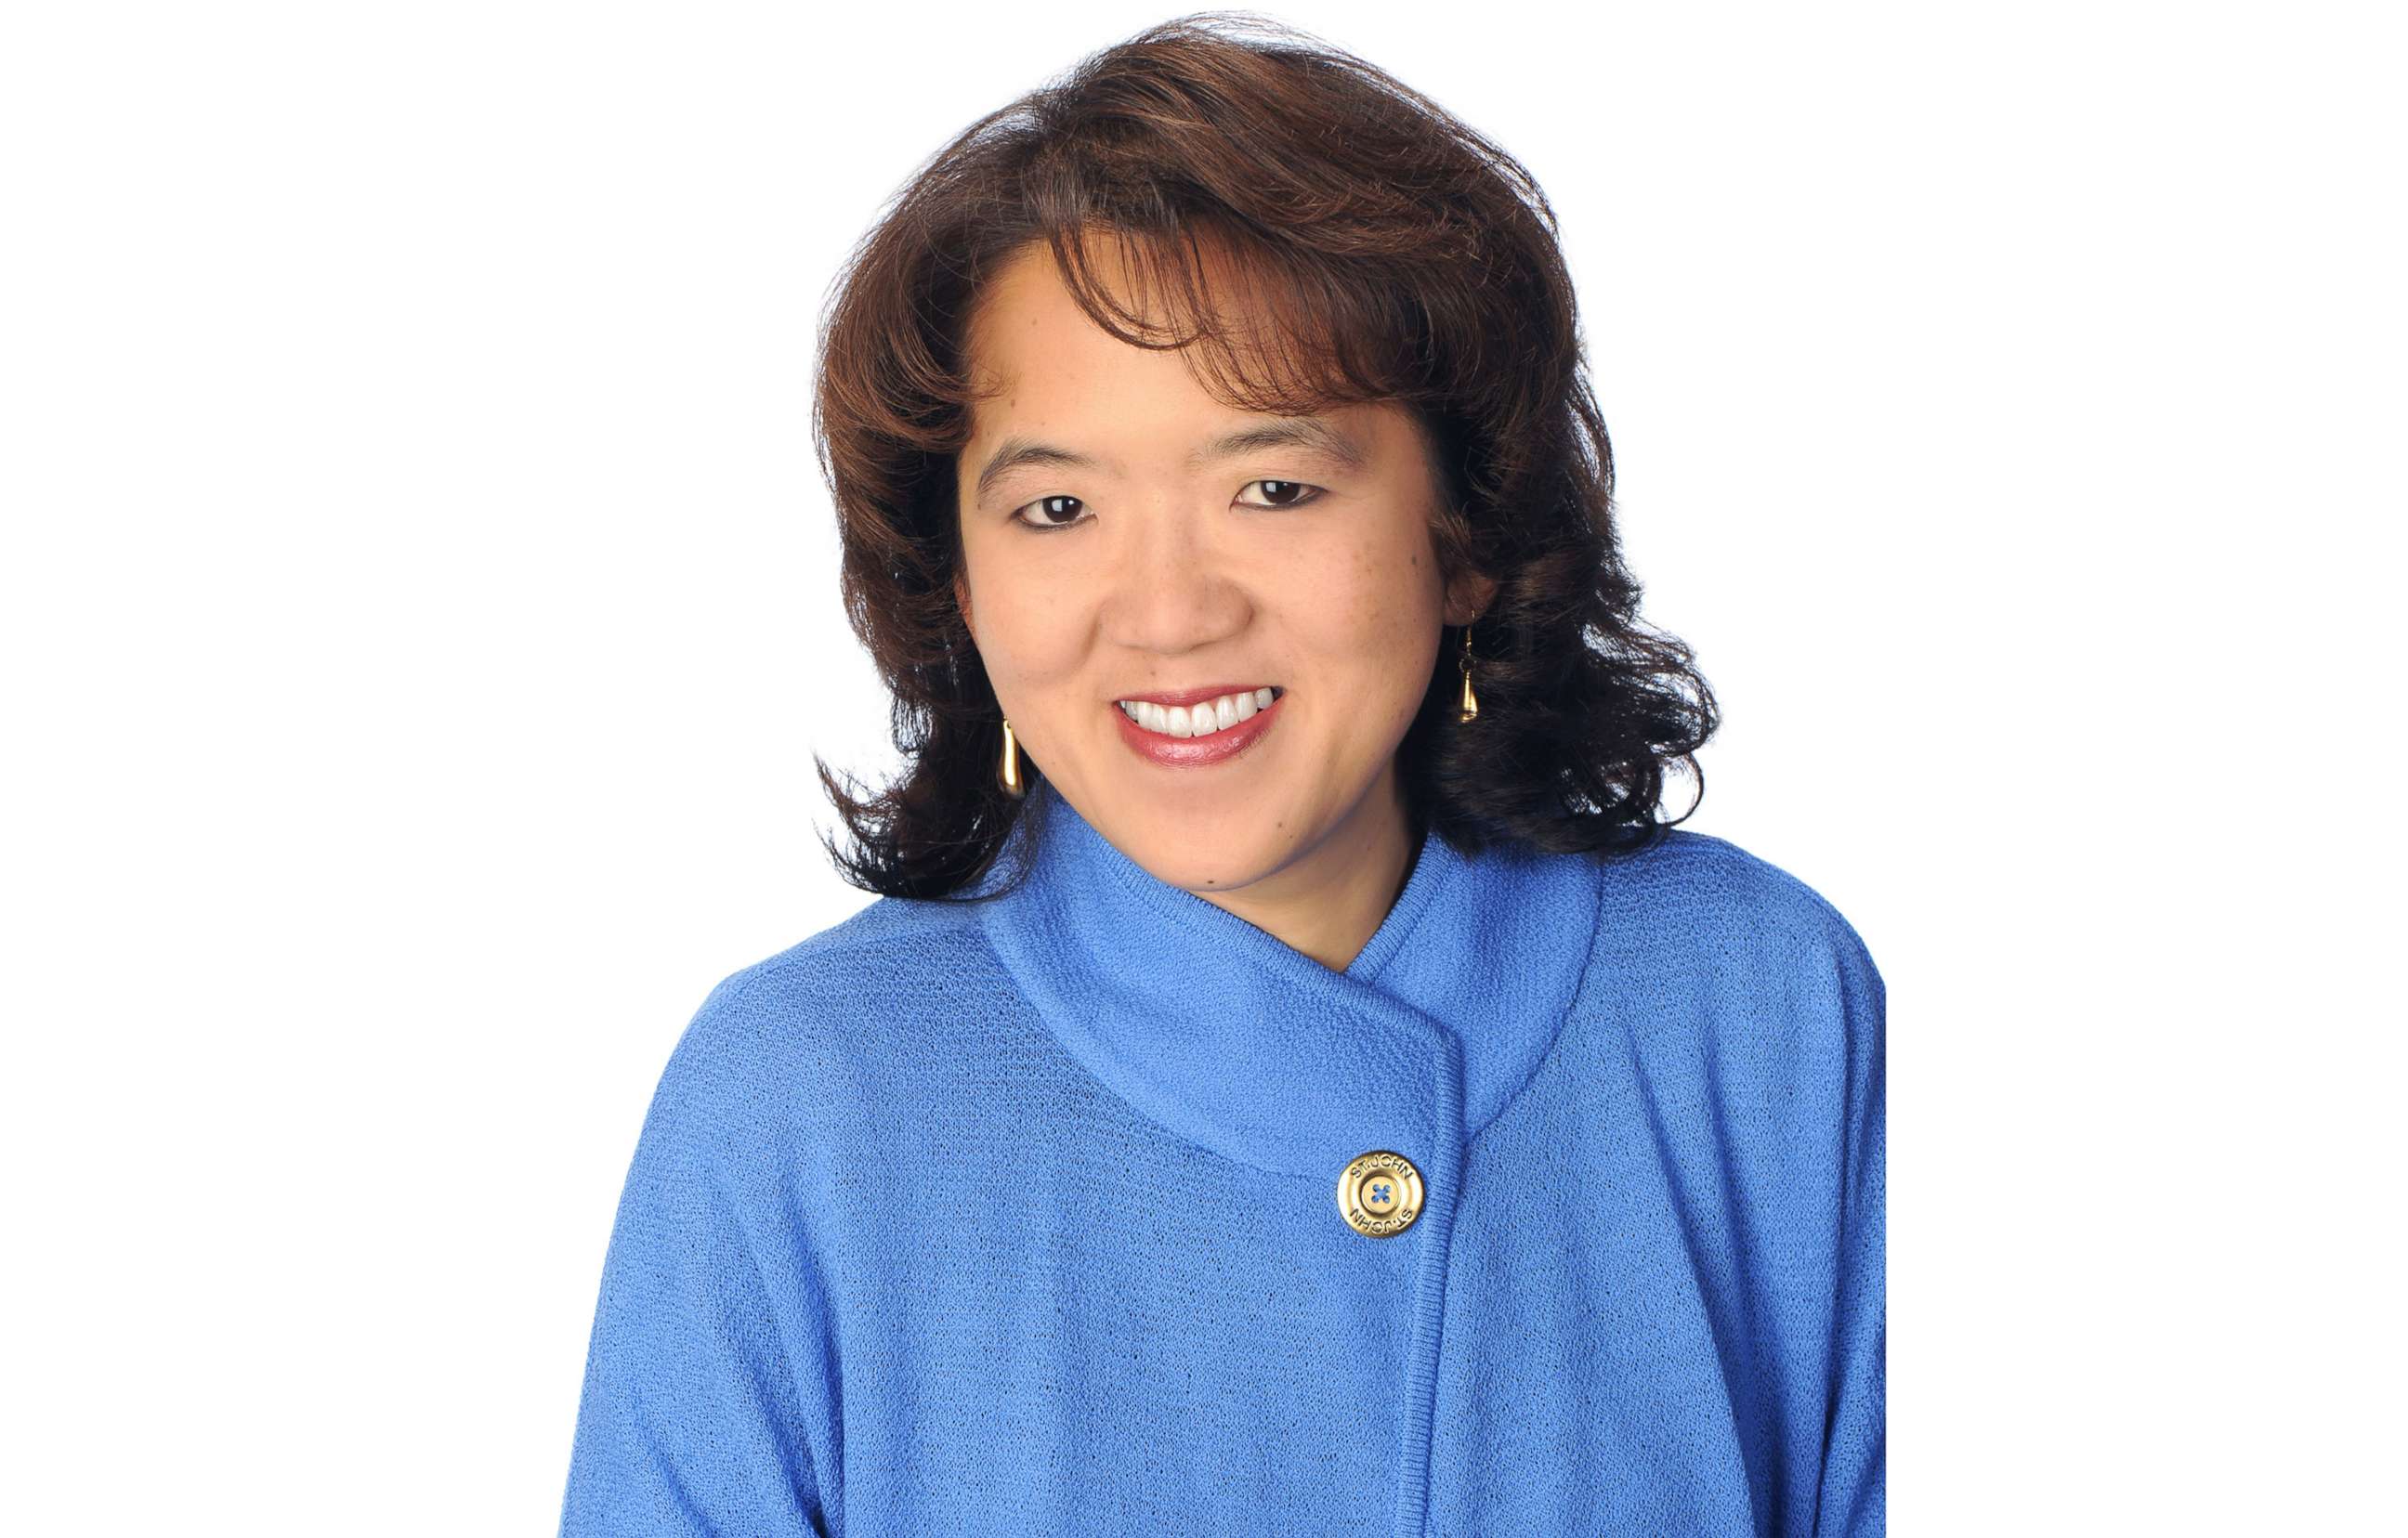 PHOTO: AT&T Business has named Anne Chow CEO, the first woman to hold the position in company history.